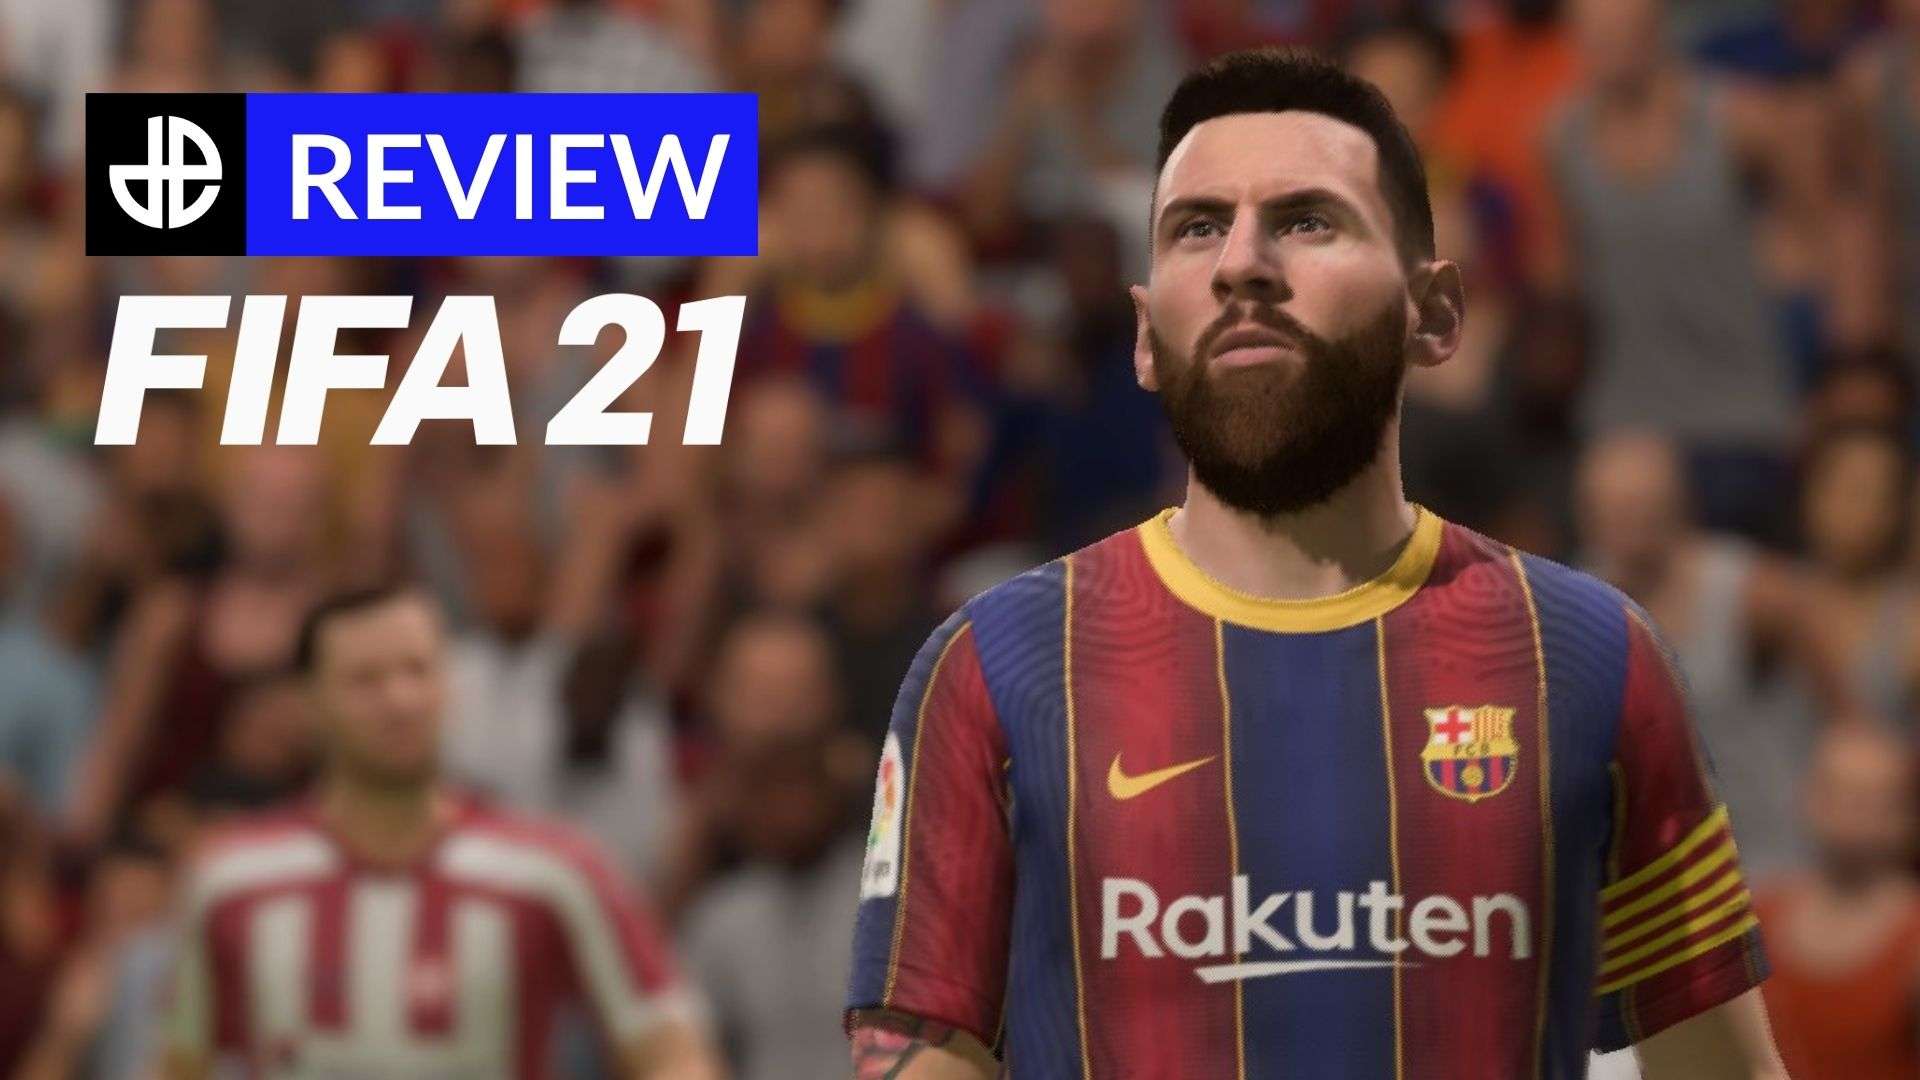 FIFA 21 with Lionel Messi